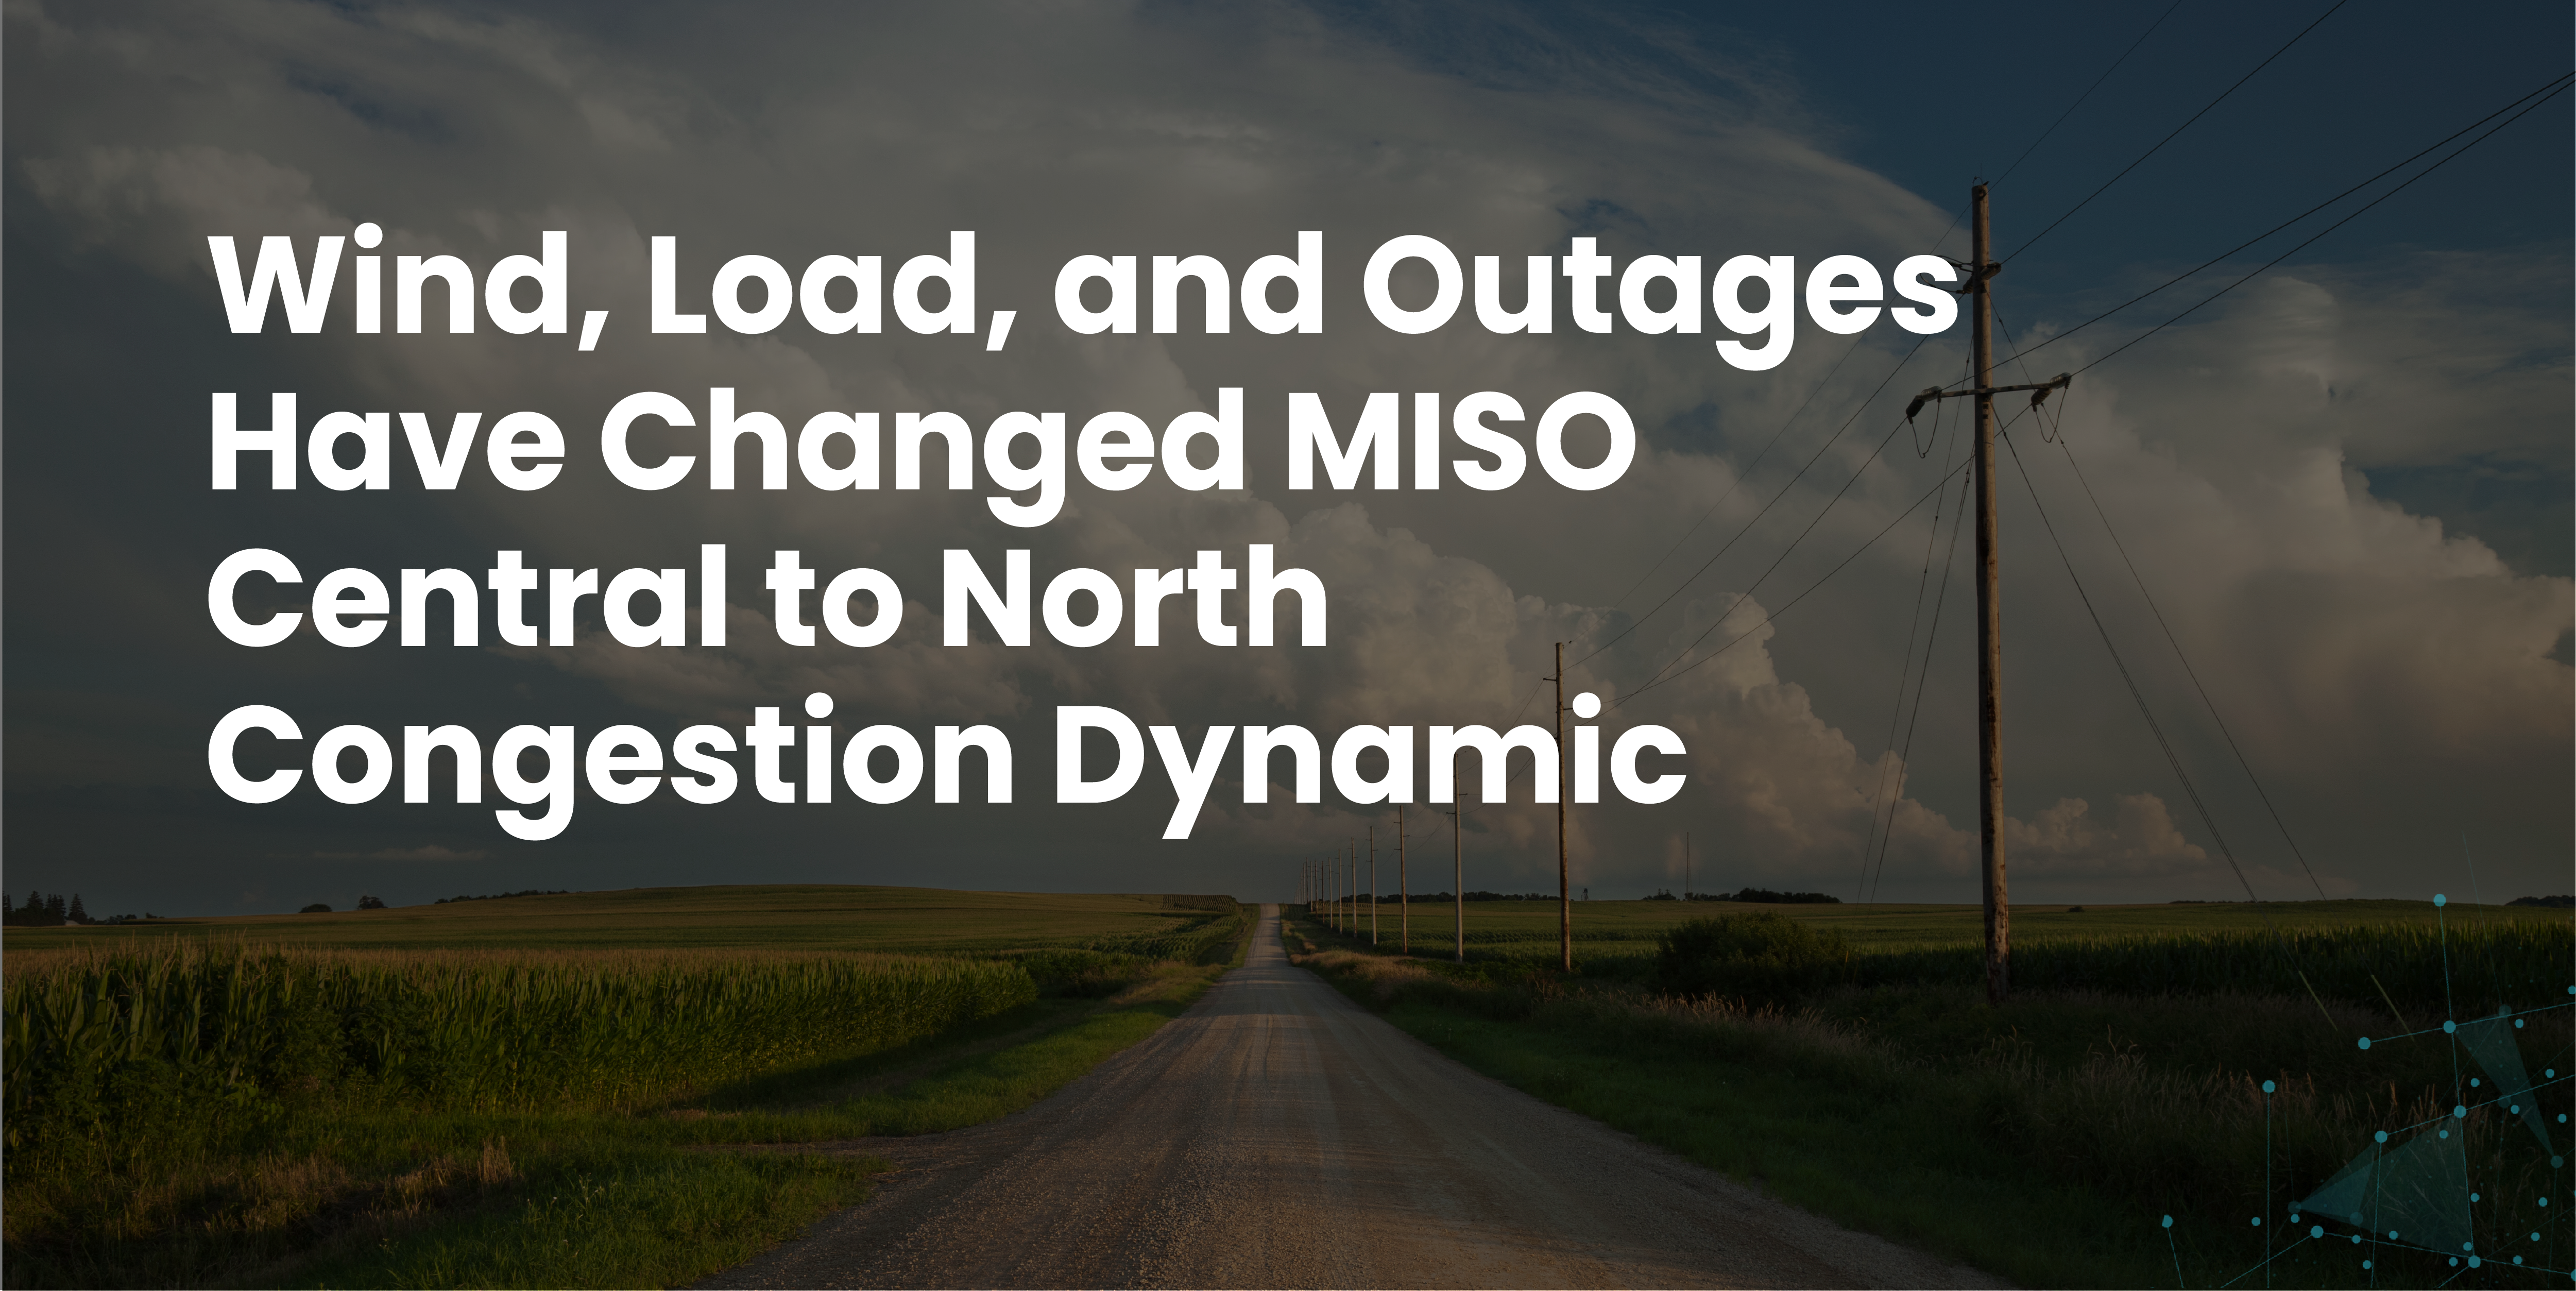 Wind, Load, and Outages have Changed MISO Central to North Congestion Dynamic